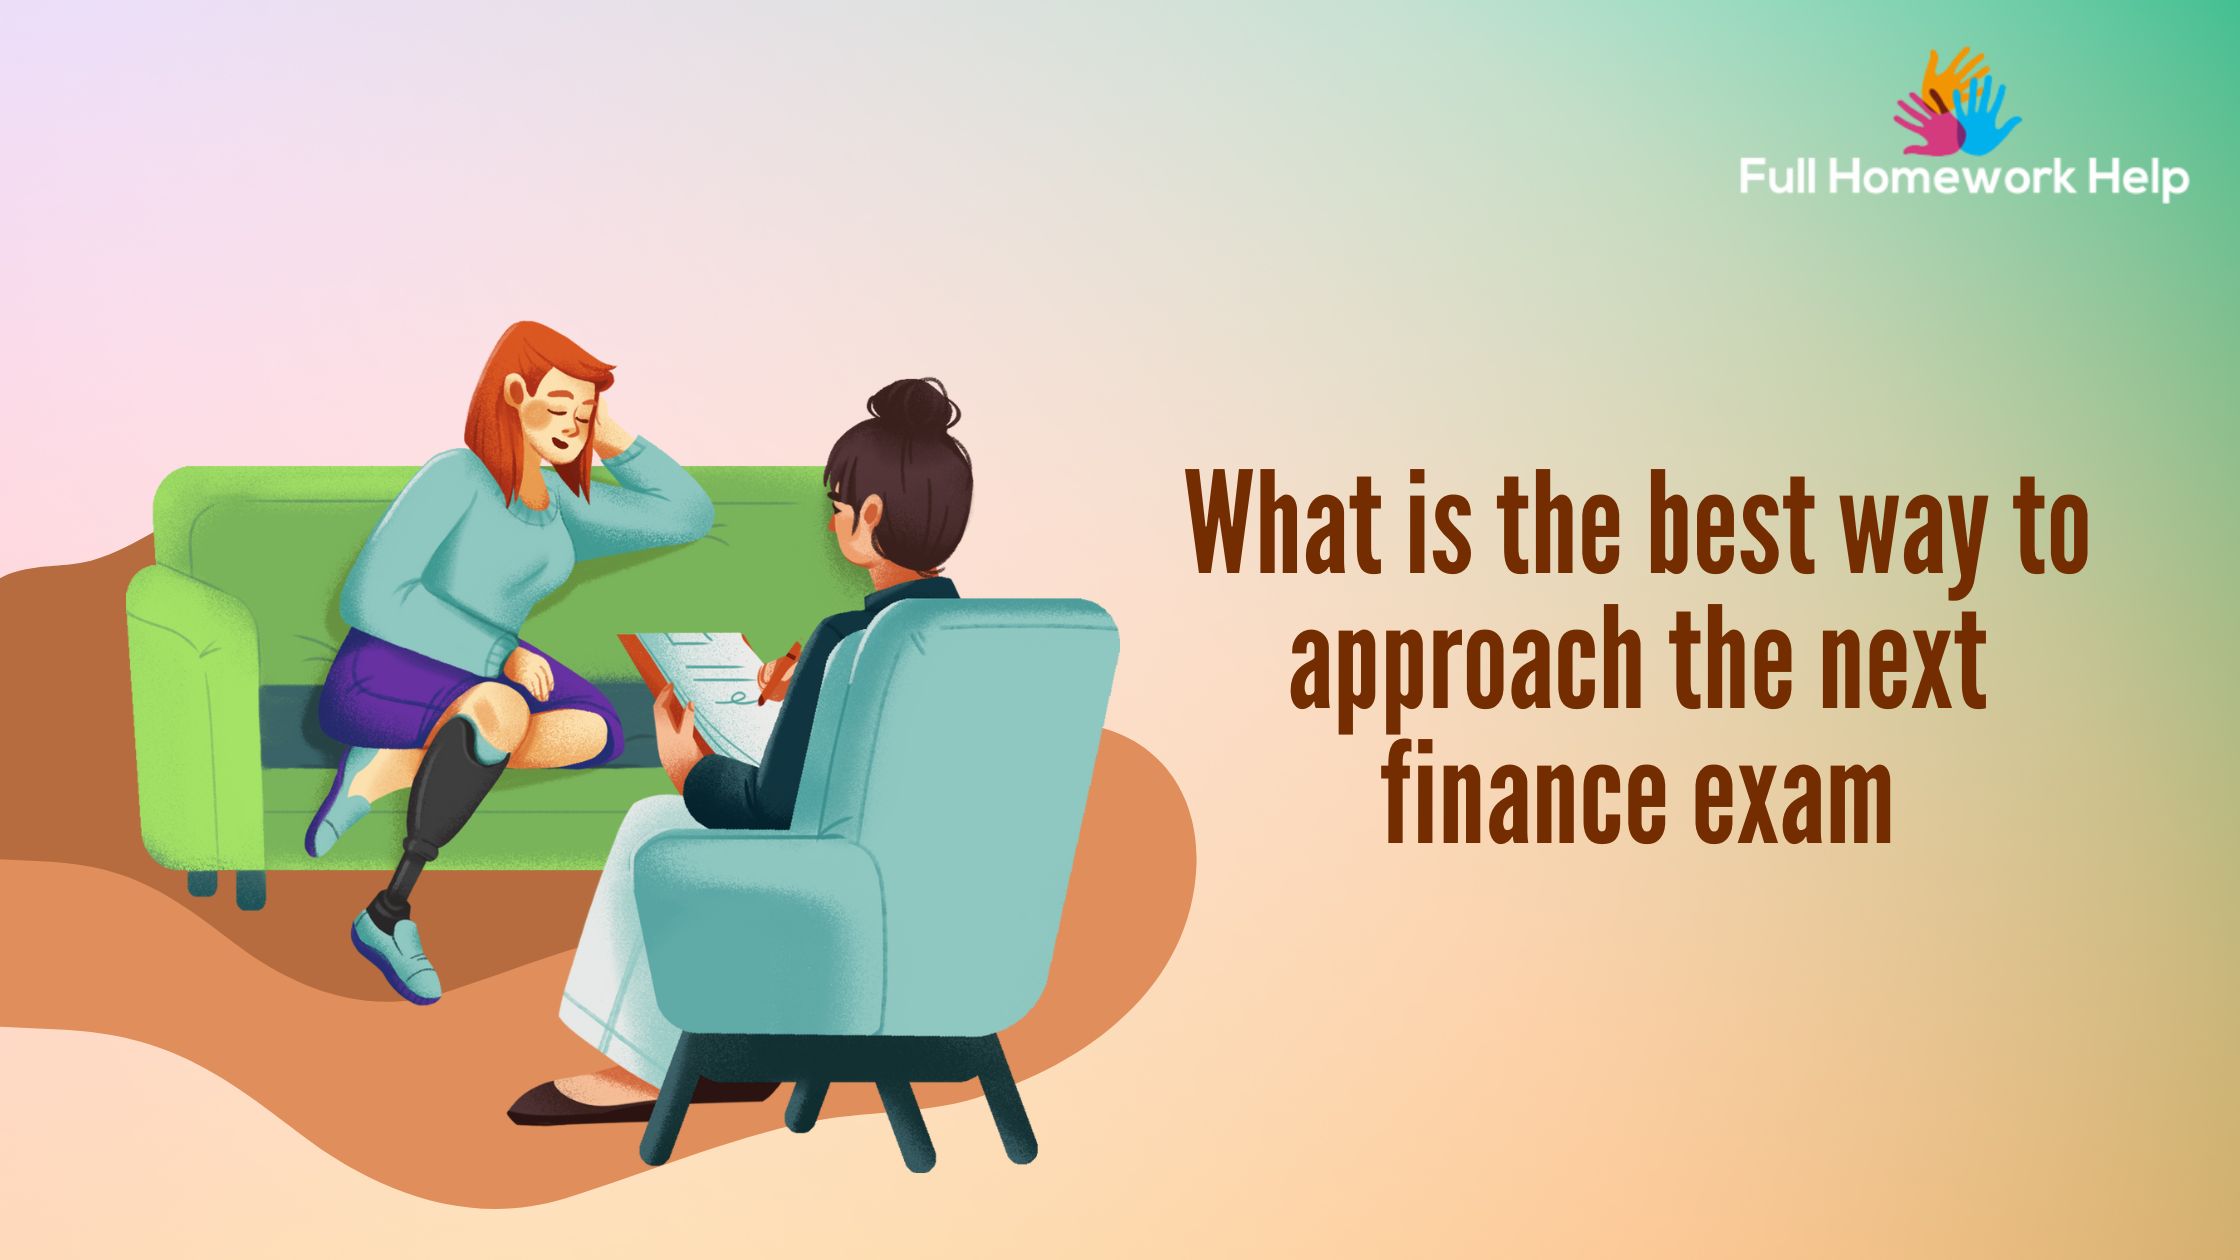 What is the best way to approach the next finance exam